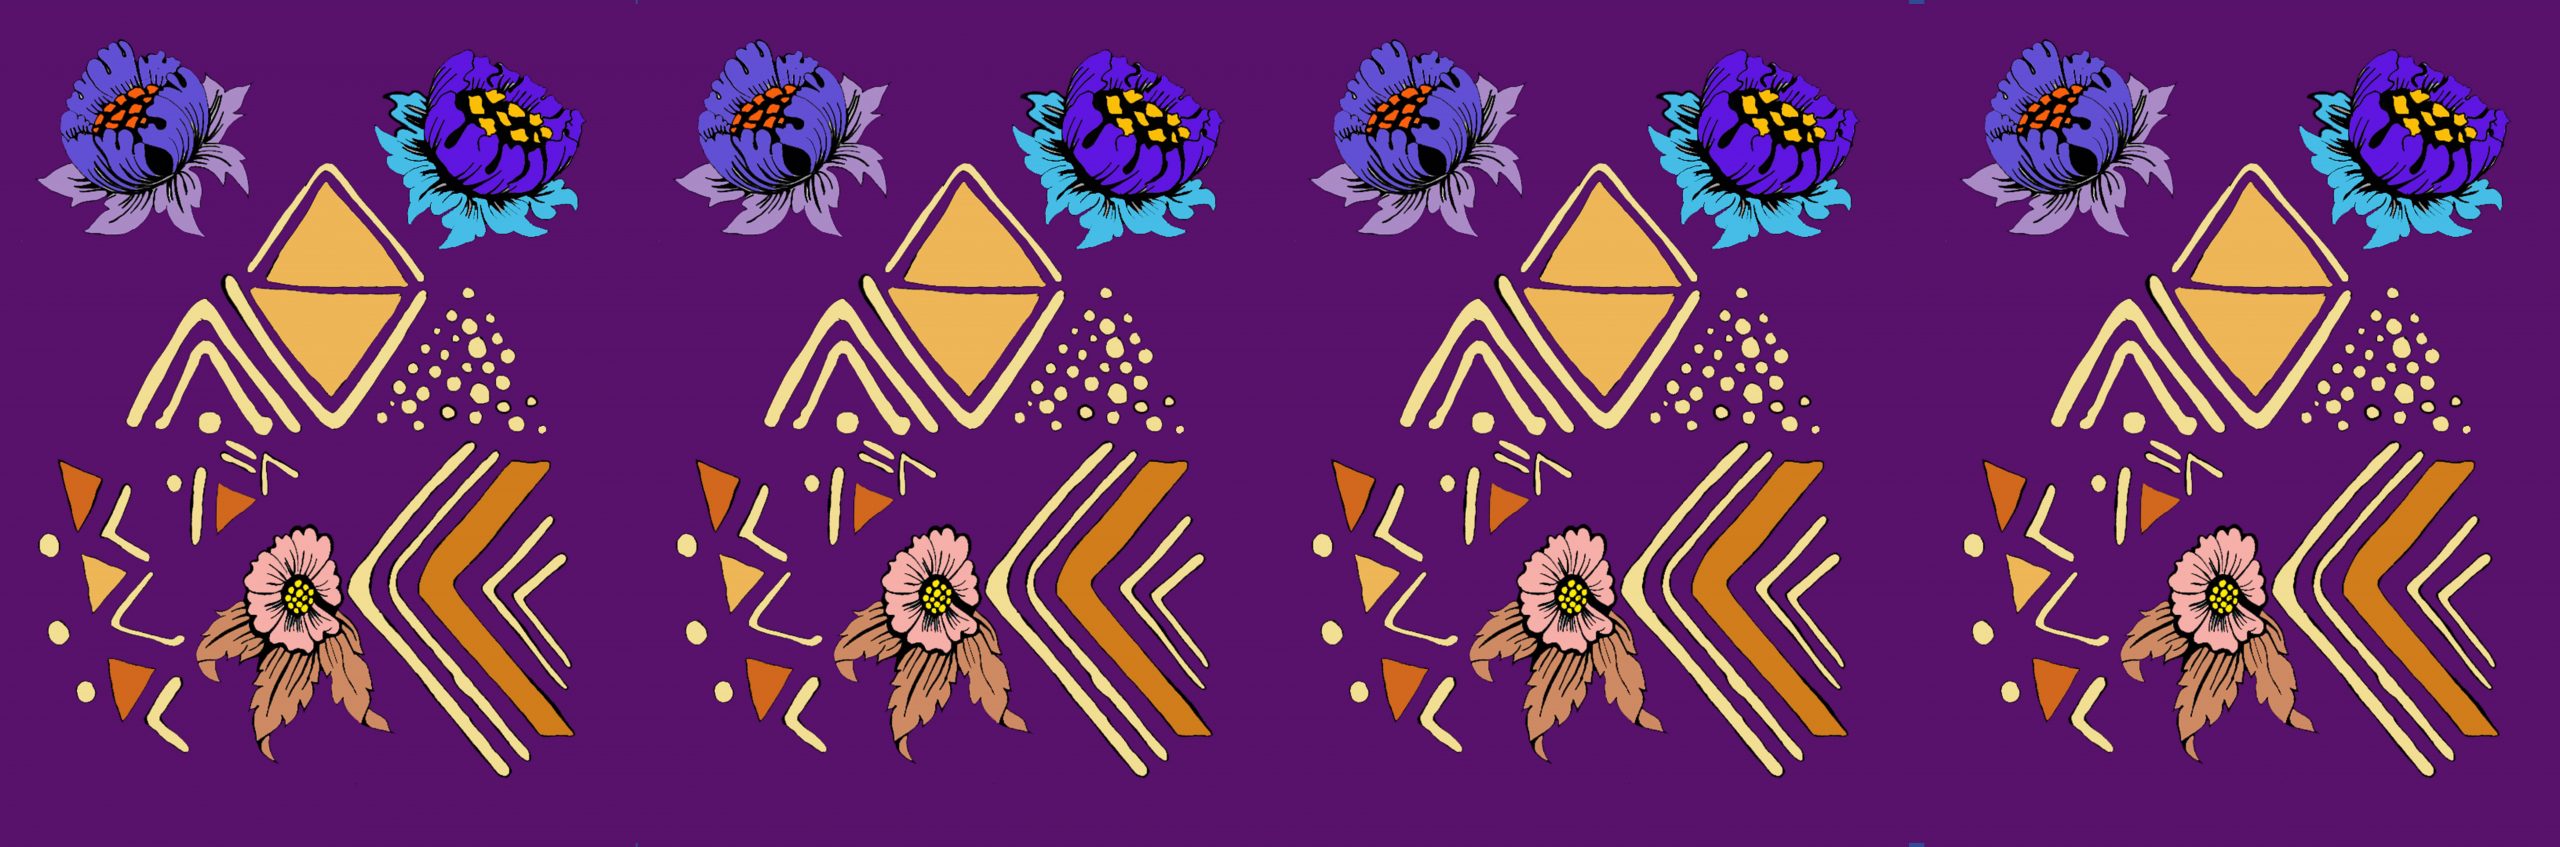 Floral and triangular motifs in blue, yellow, pink, orange against purple background